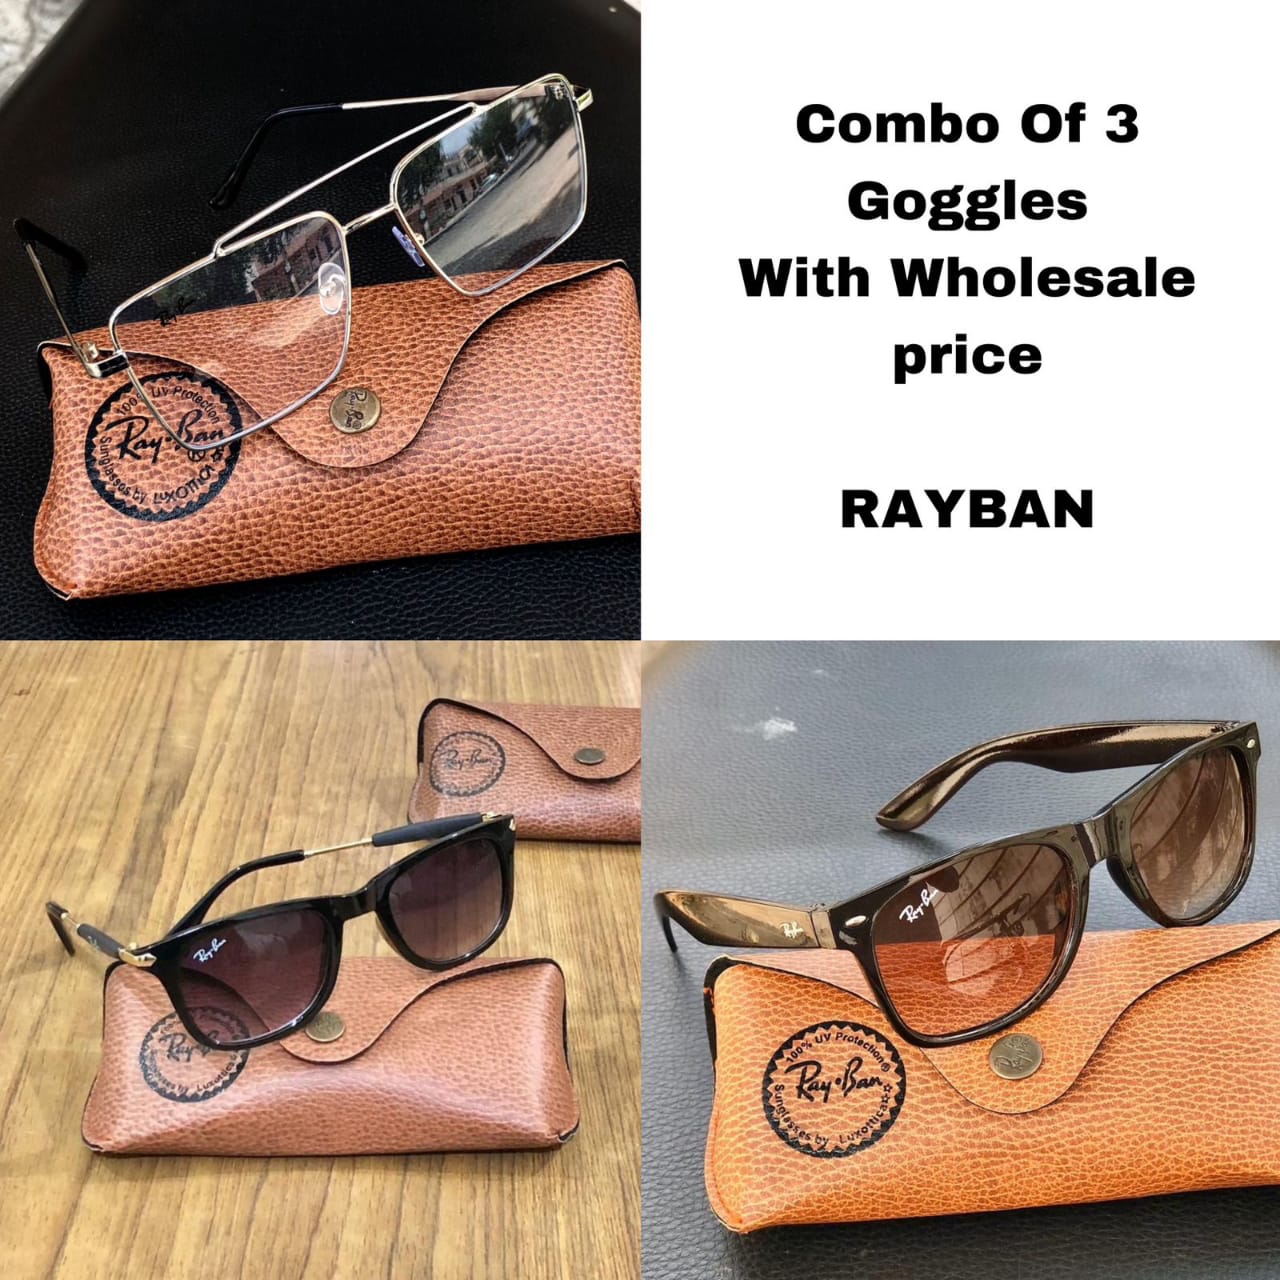 Details View - Rayban sunglasses photos - reseller,reseller marketplace,advetising your products,reseller bazzar,resellerbazzar.in,india's classified site,Rayban sunglasses | Rayban sunglasses in surat | Rayban sunglasses in gujarat